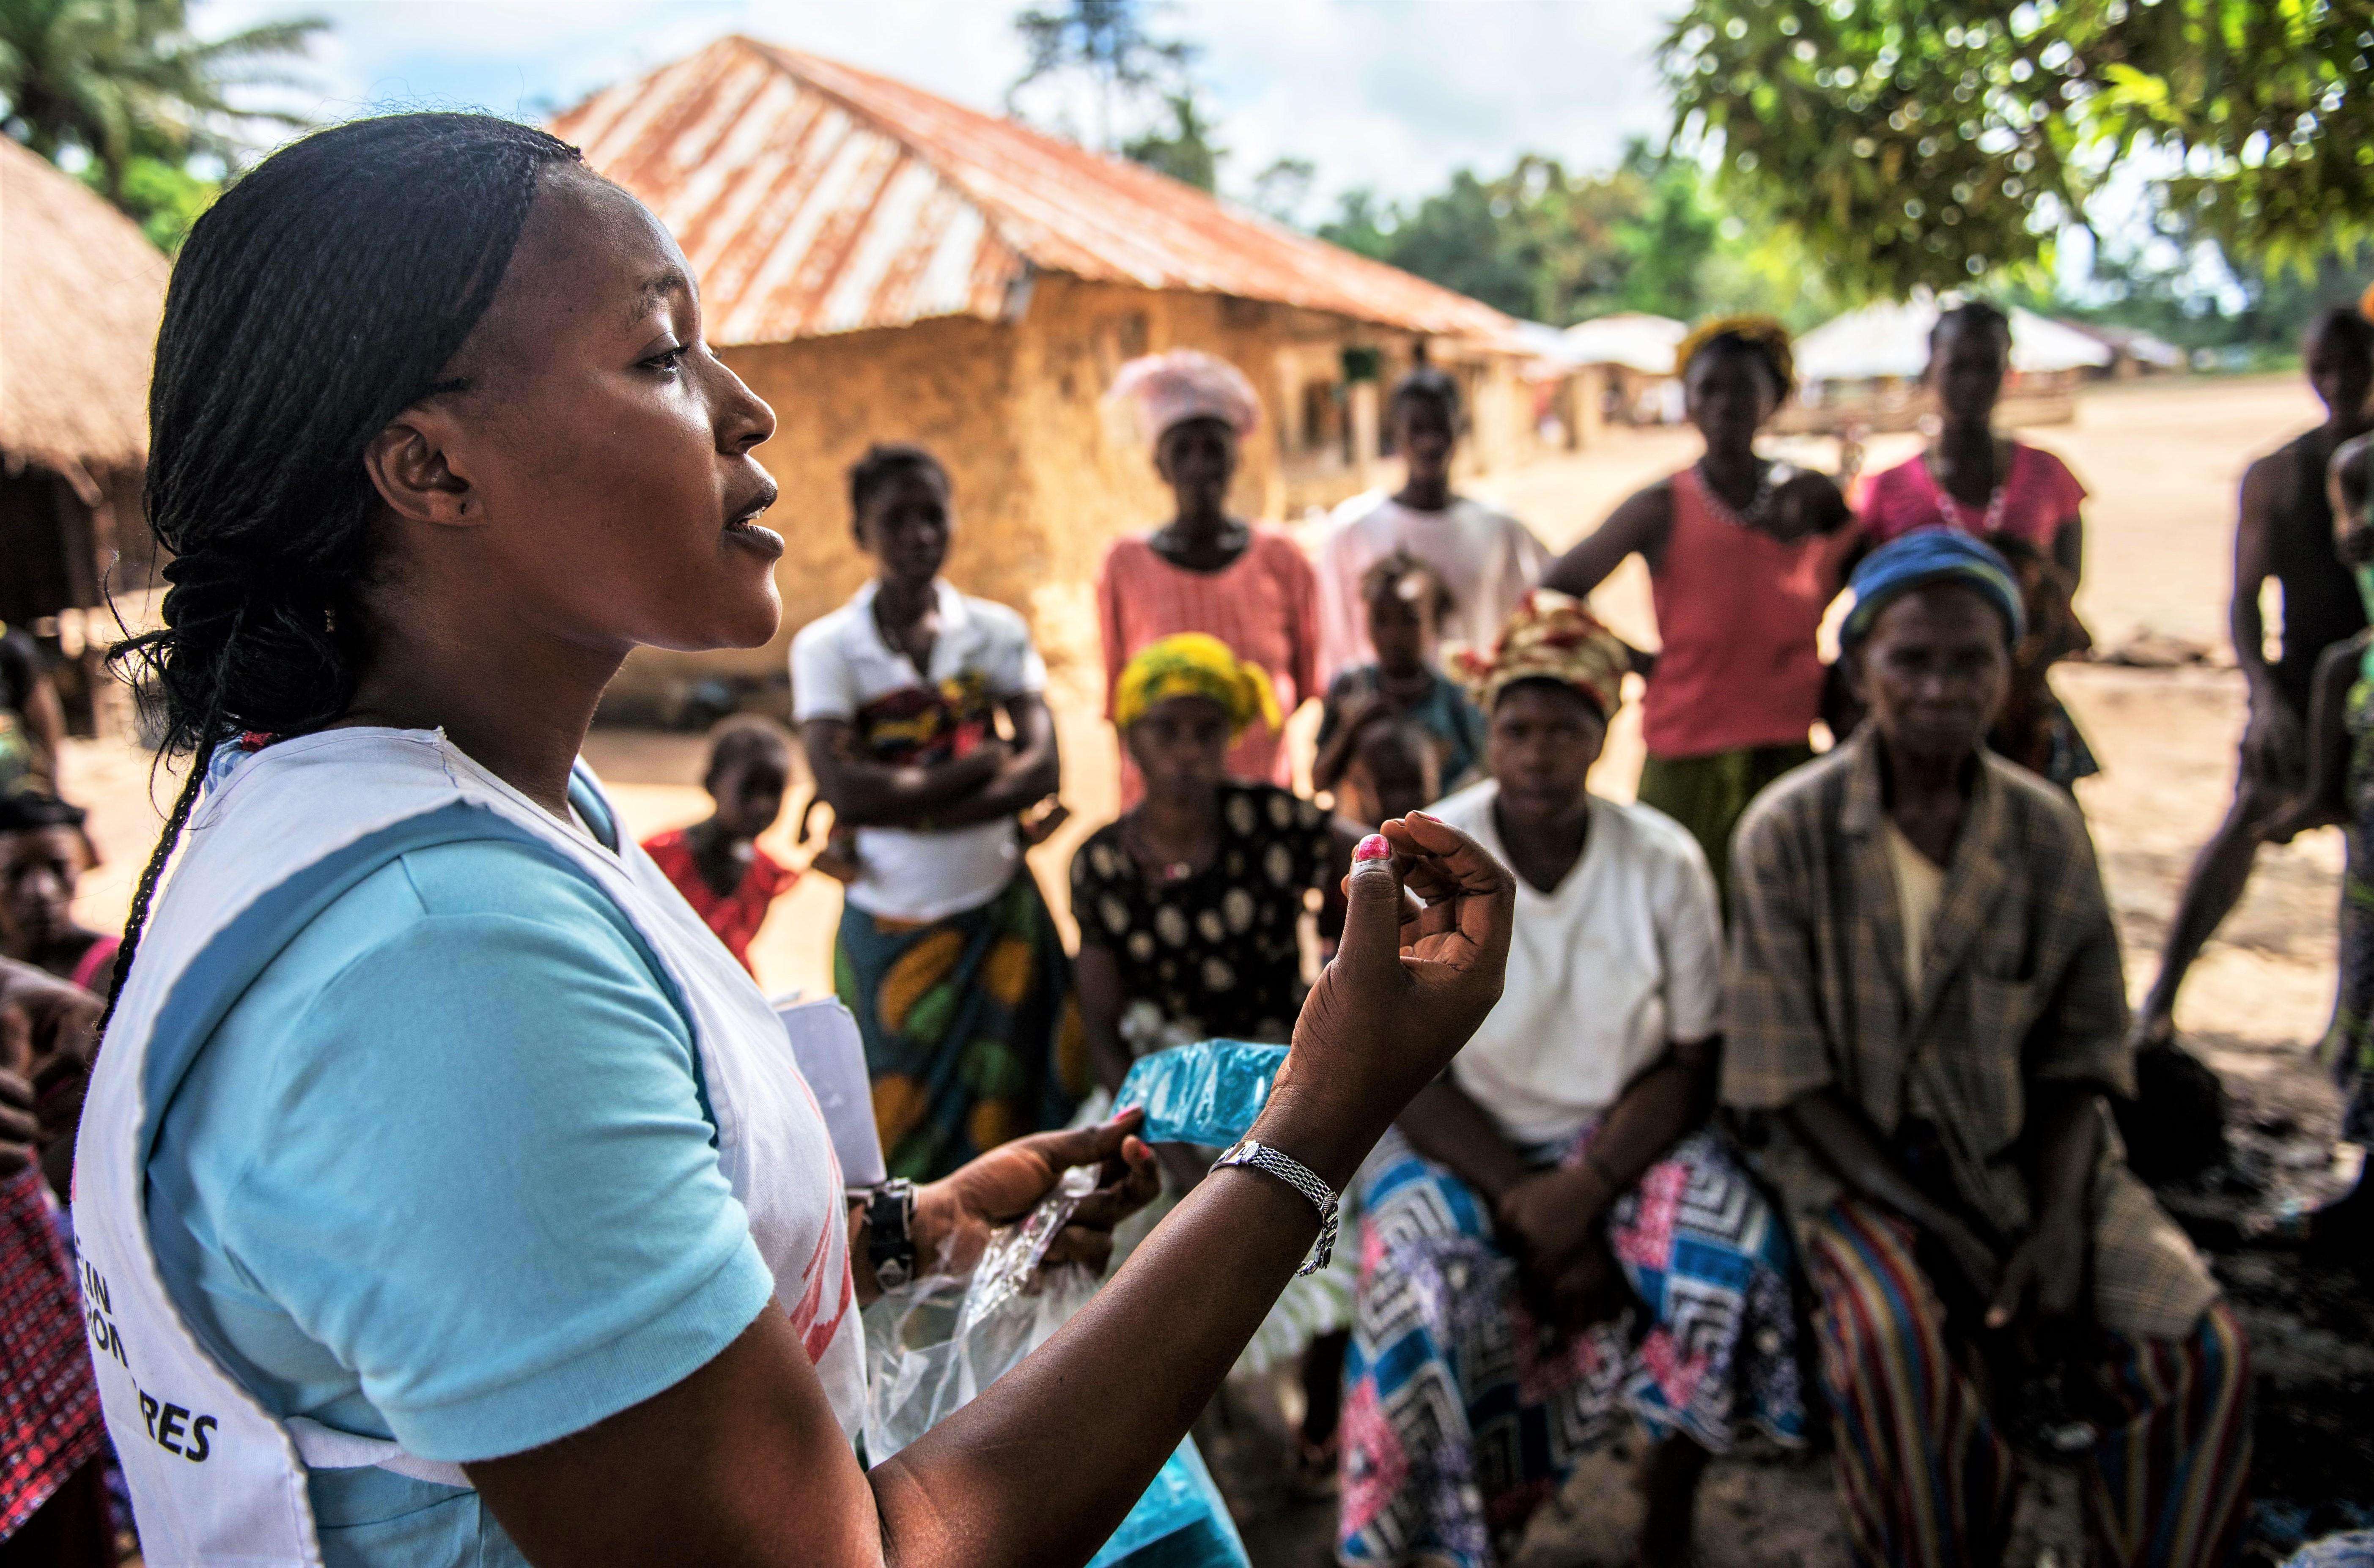 Health promoter, Emma Kamara, talks to villagers about health issues during a MSF outreach mission to treat survivors of Ebola. 